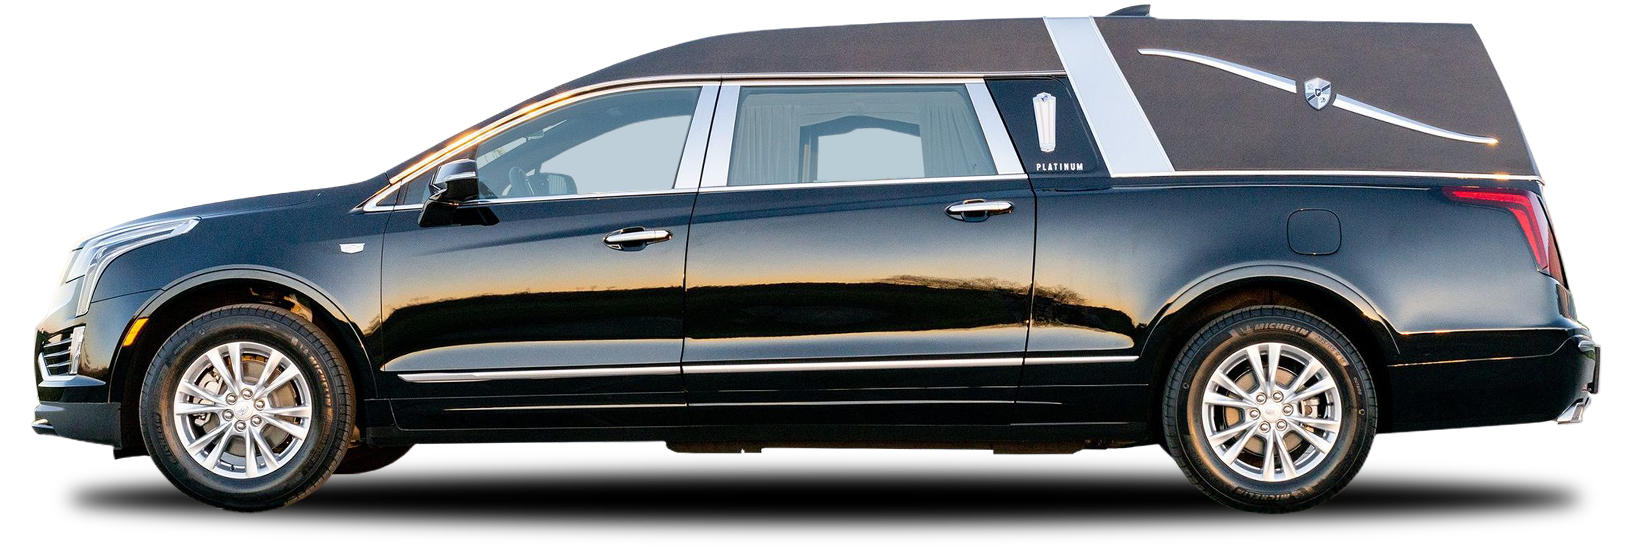 Platinum Funeral Coaches - Tailored to Fit you